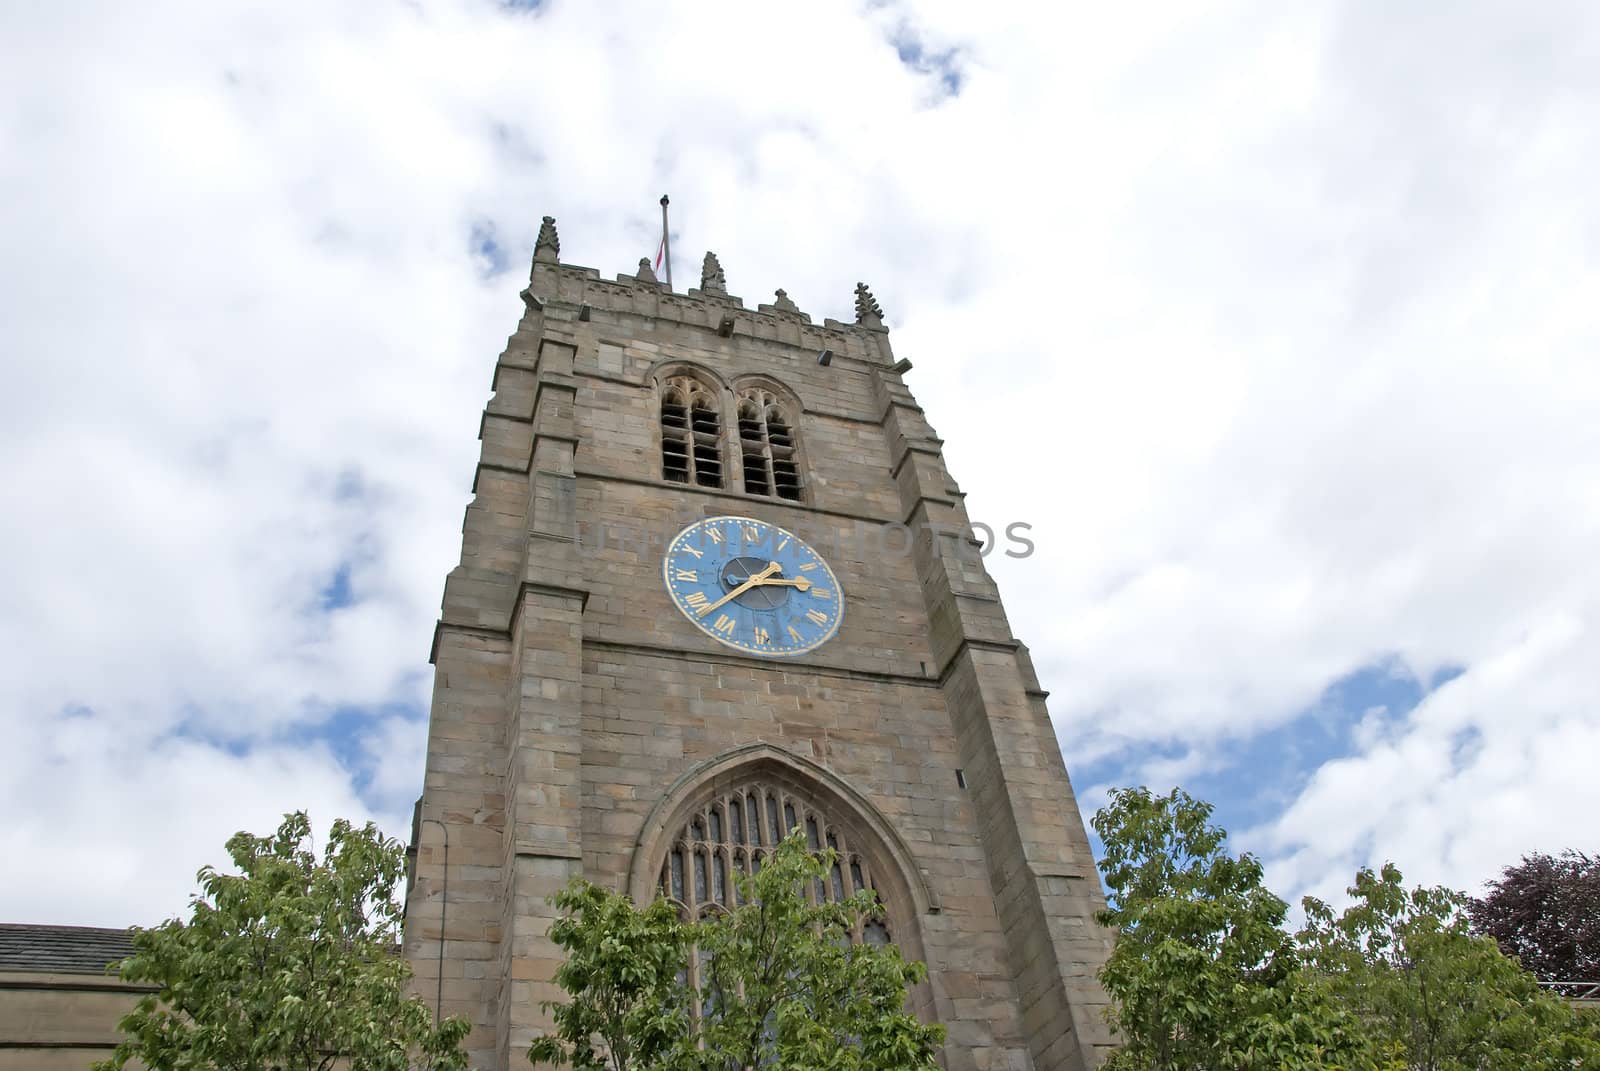 An English Cathedral Clocktower showing a blue and gold clock